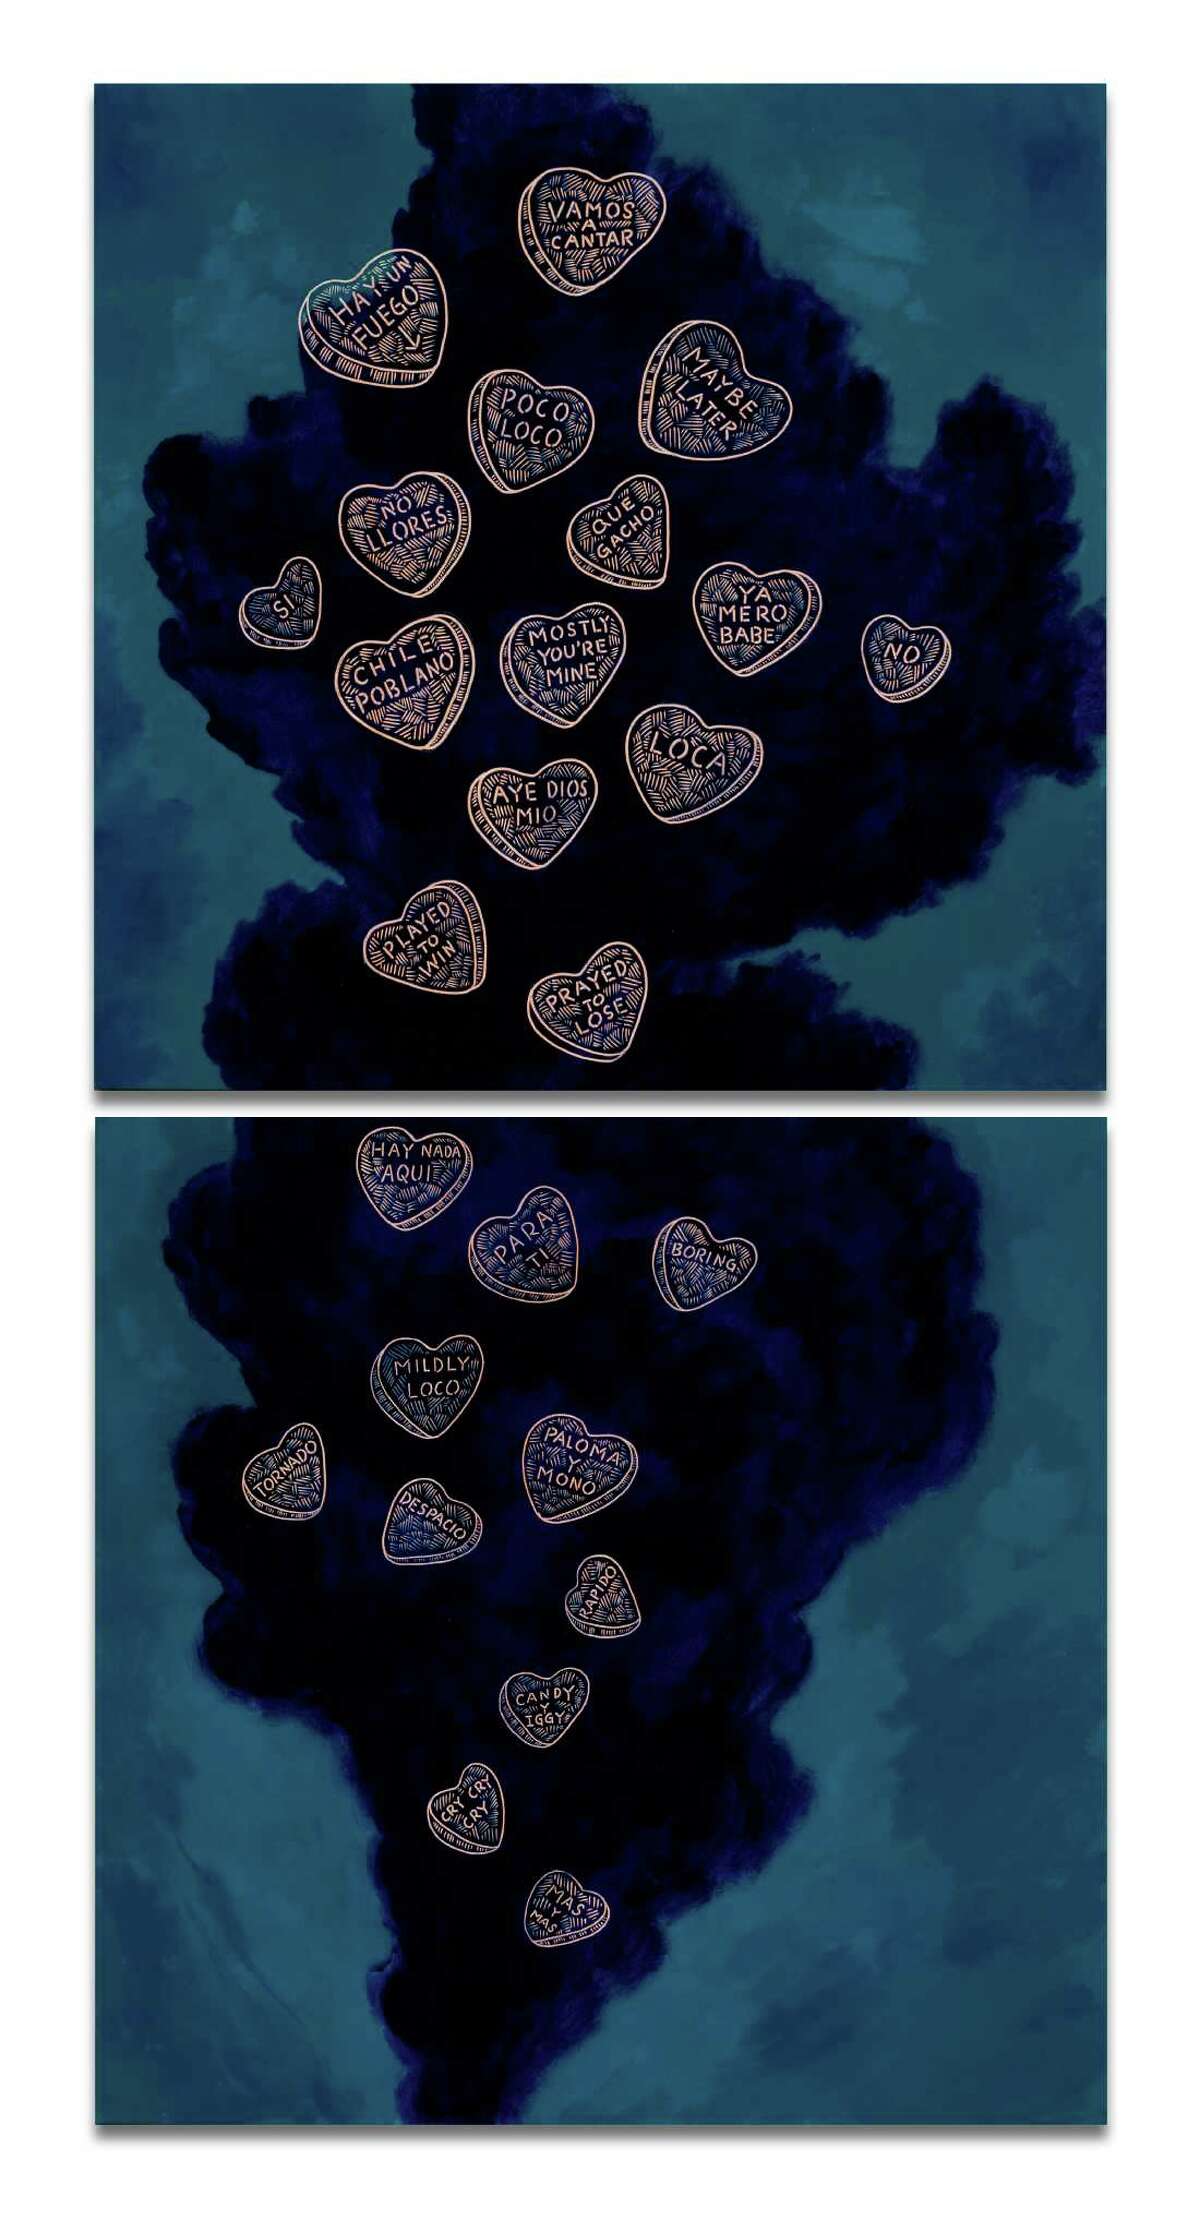 "Candy Hearts 1" by Ricky Armendariz is one of the works featured in "More than Words," a Contemporary Art Month exhibit at Ruiz-Healy Art.